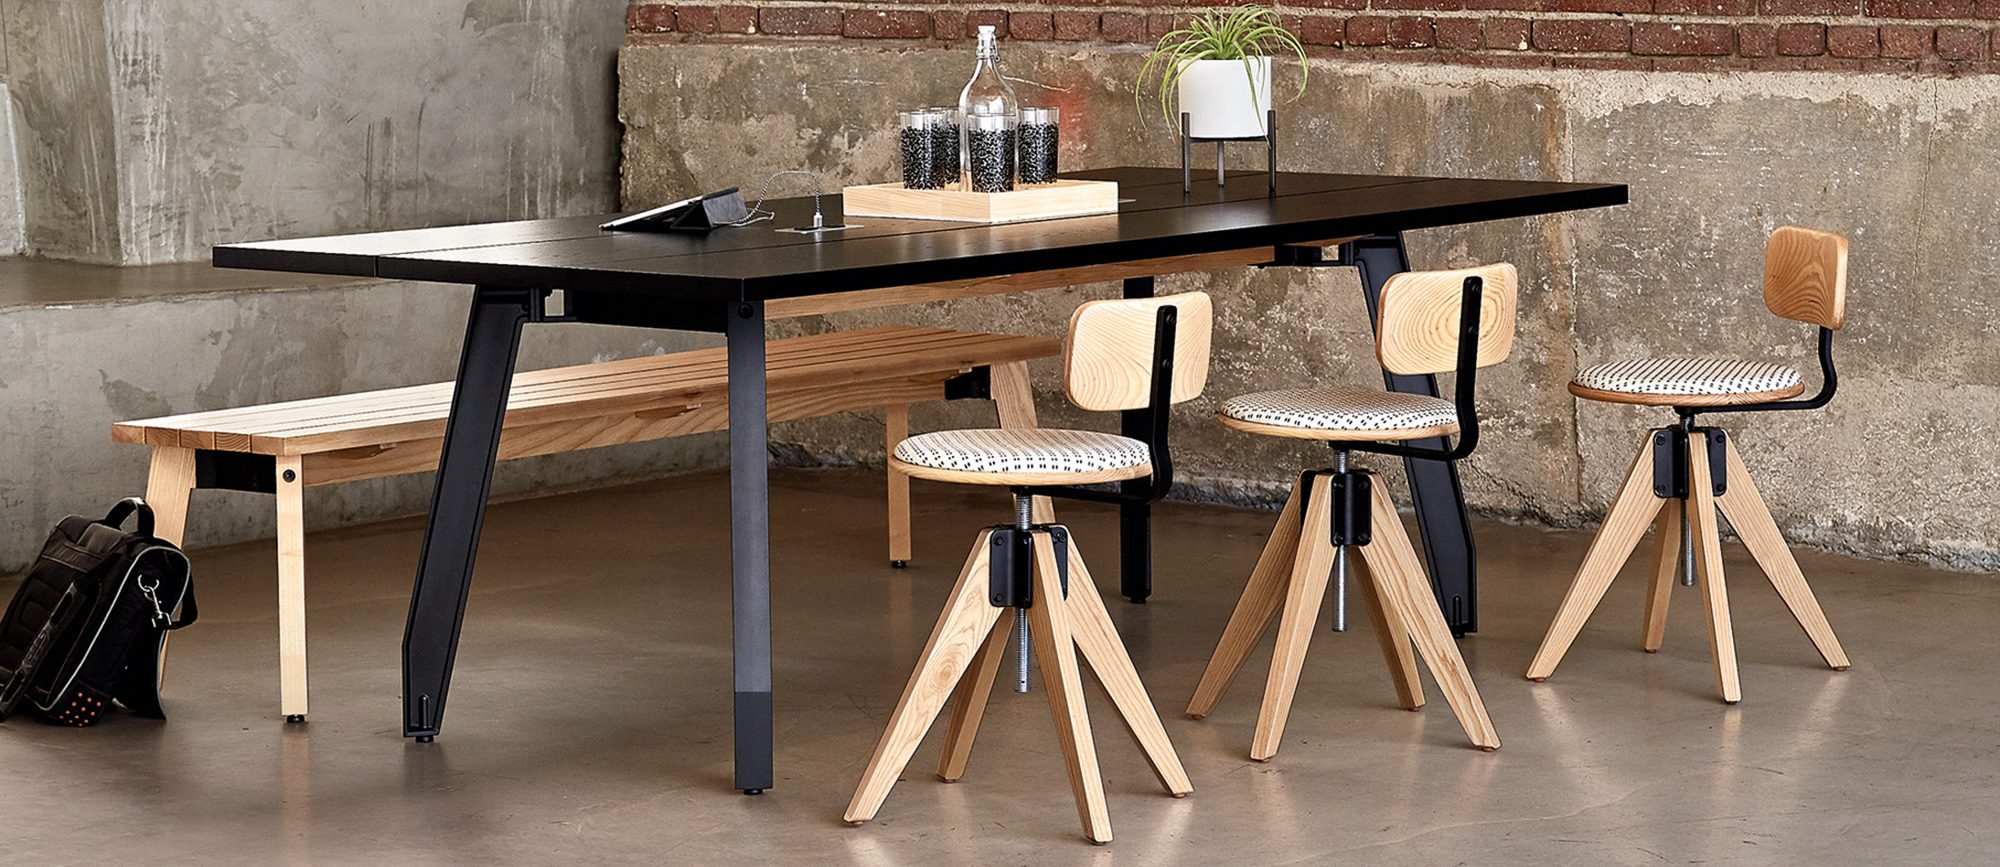 WorkSmith Stools, Bench and Meeting Table